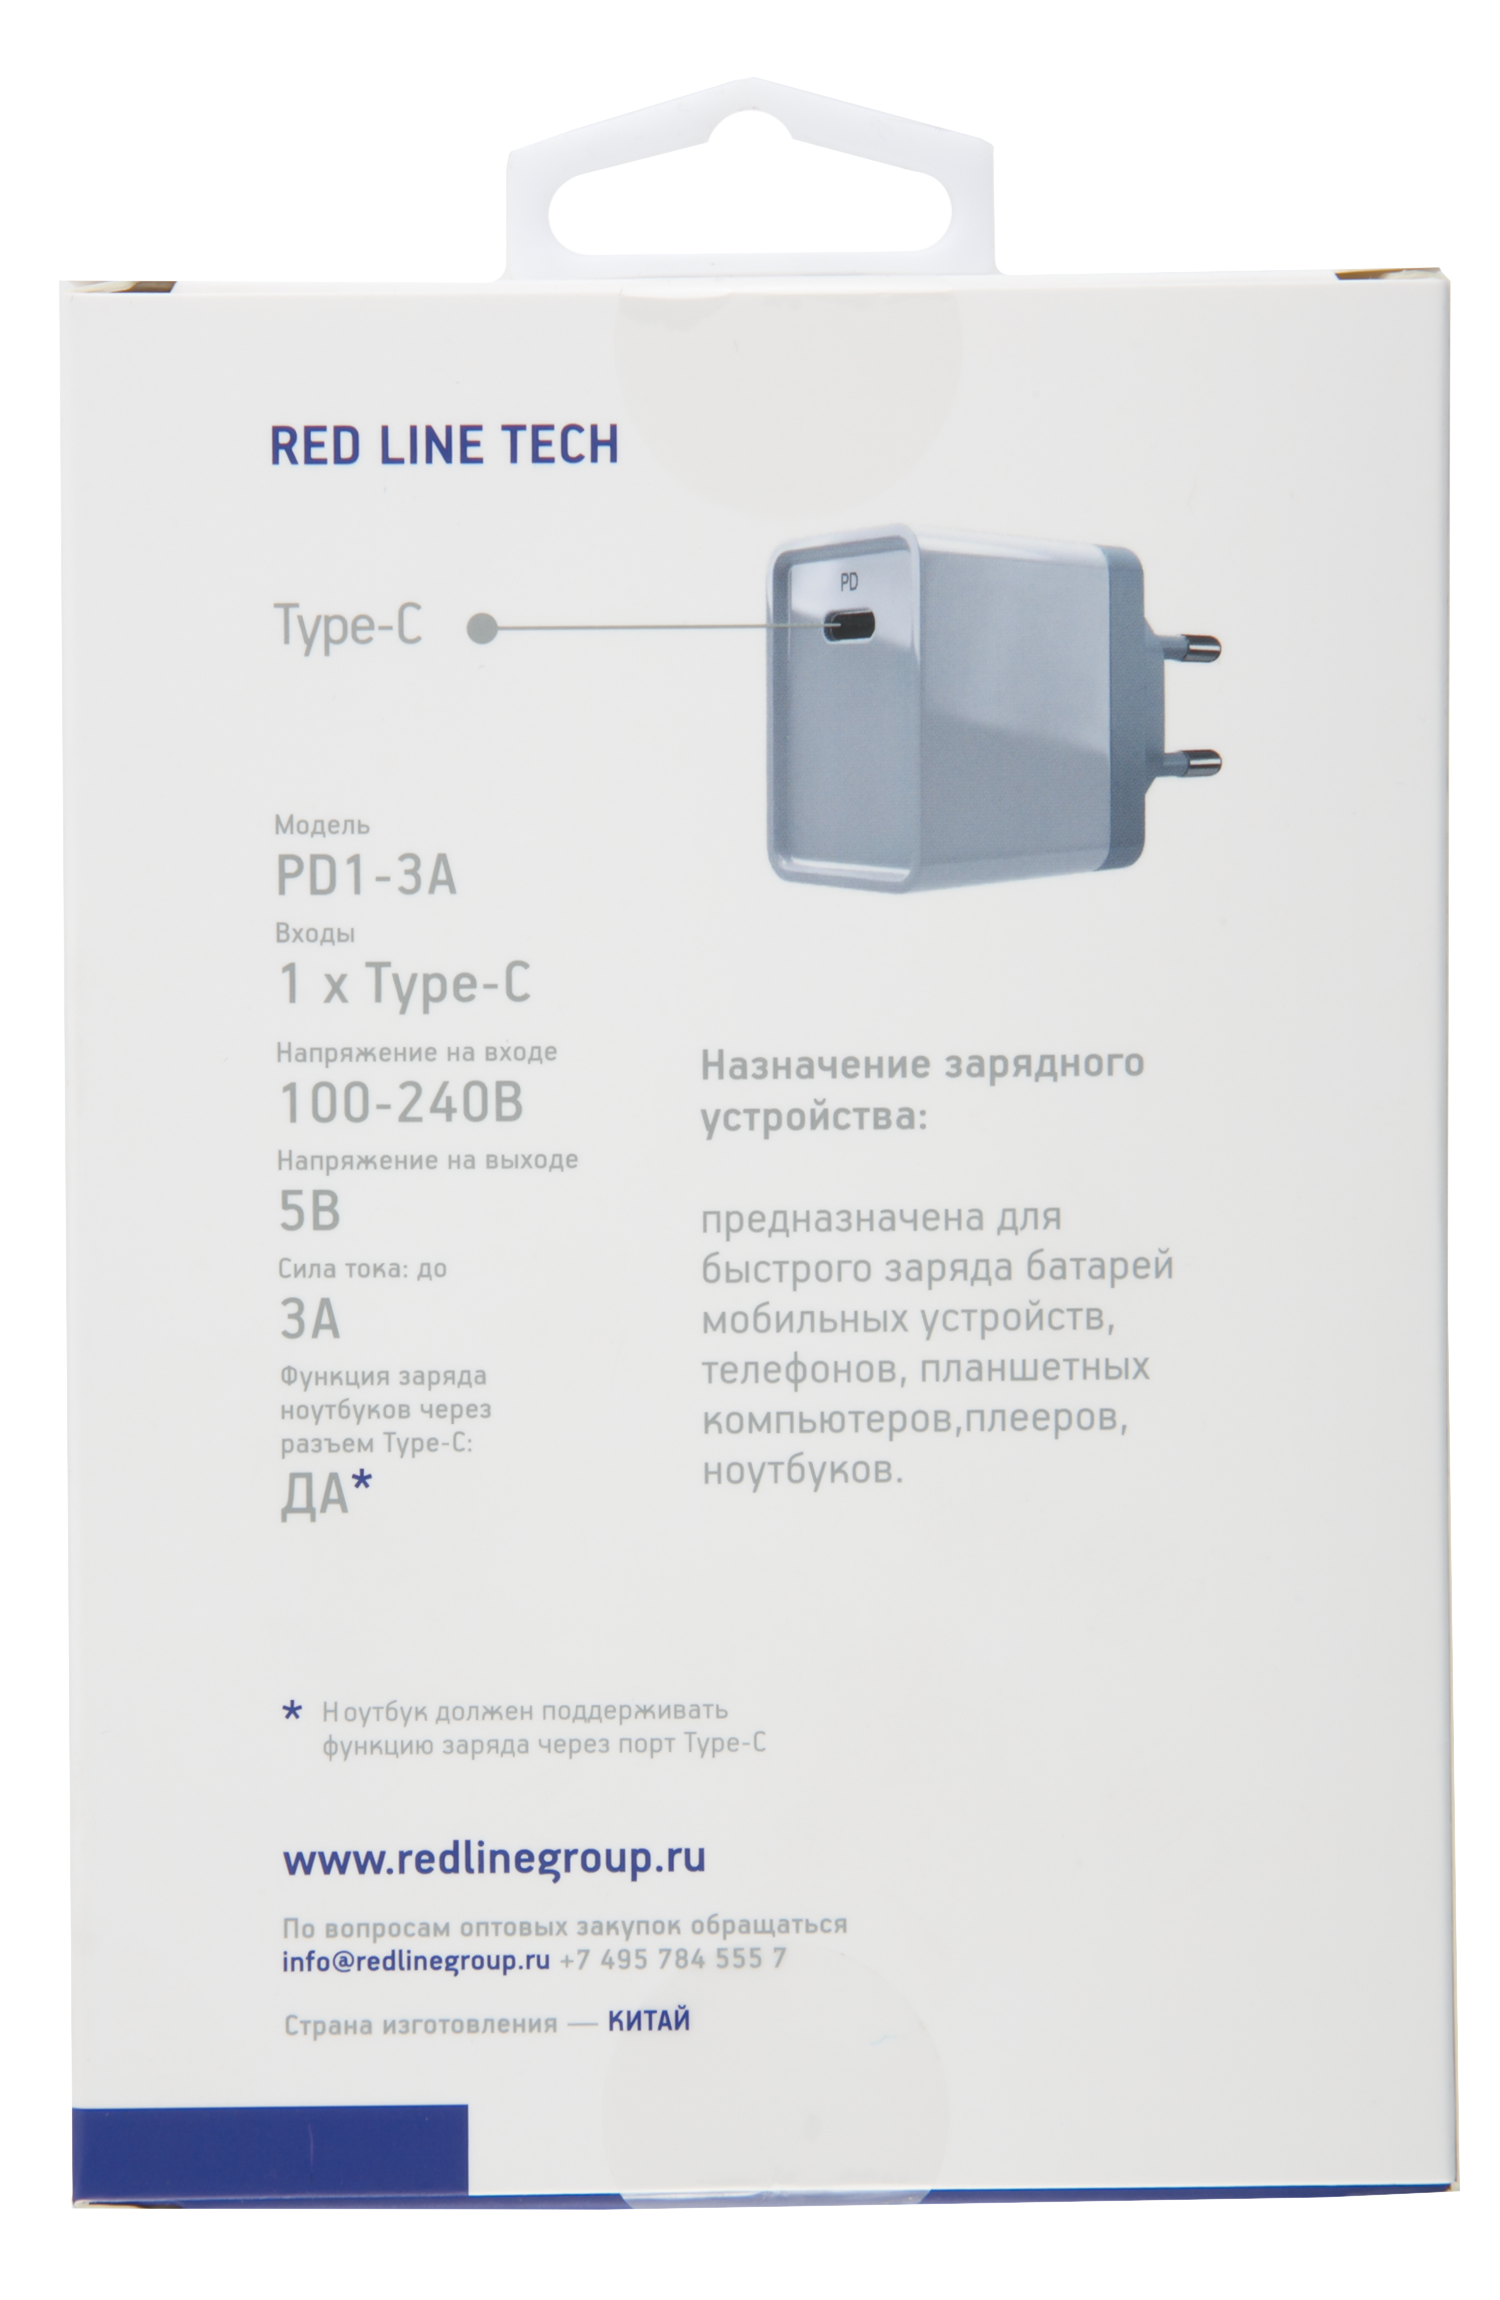 СЗУ Red Line Tech Type-C (модель PD1-3A), 3A, Power Delivery